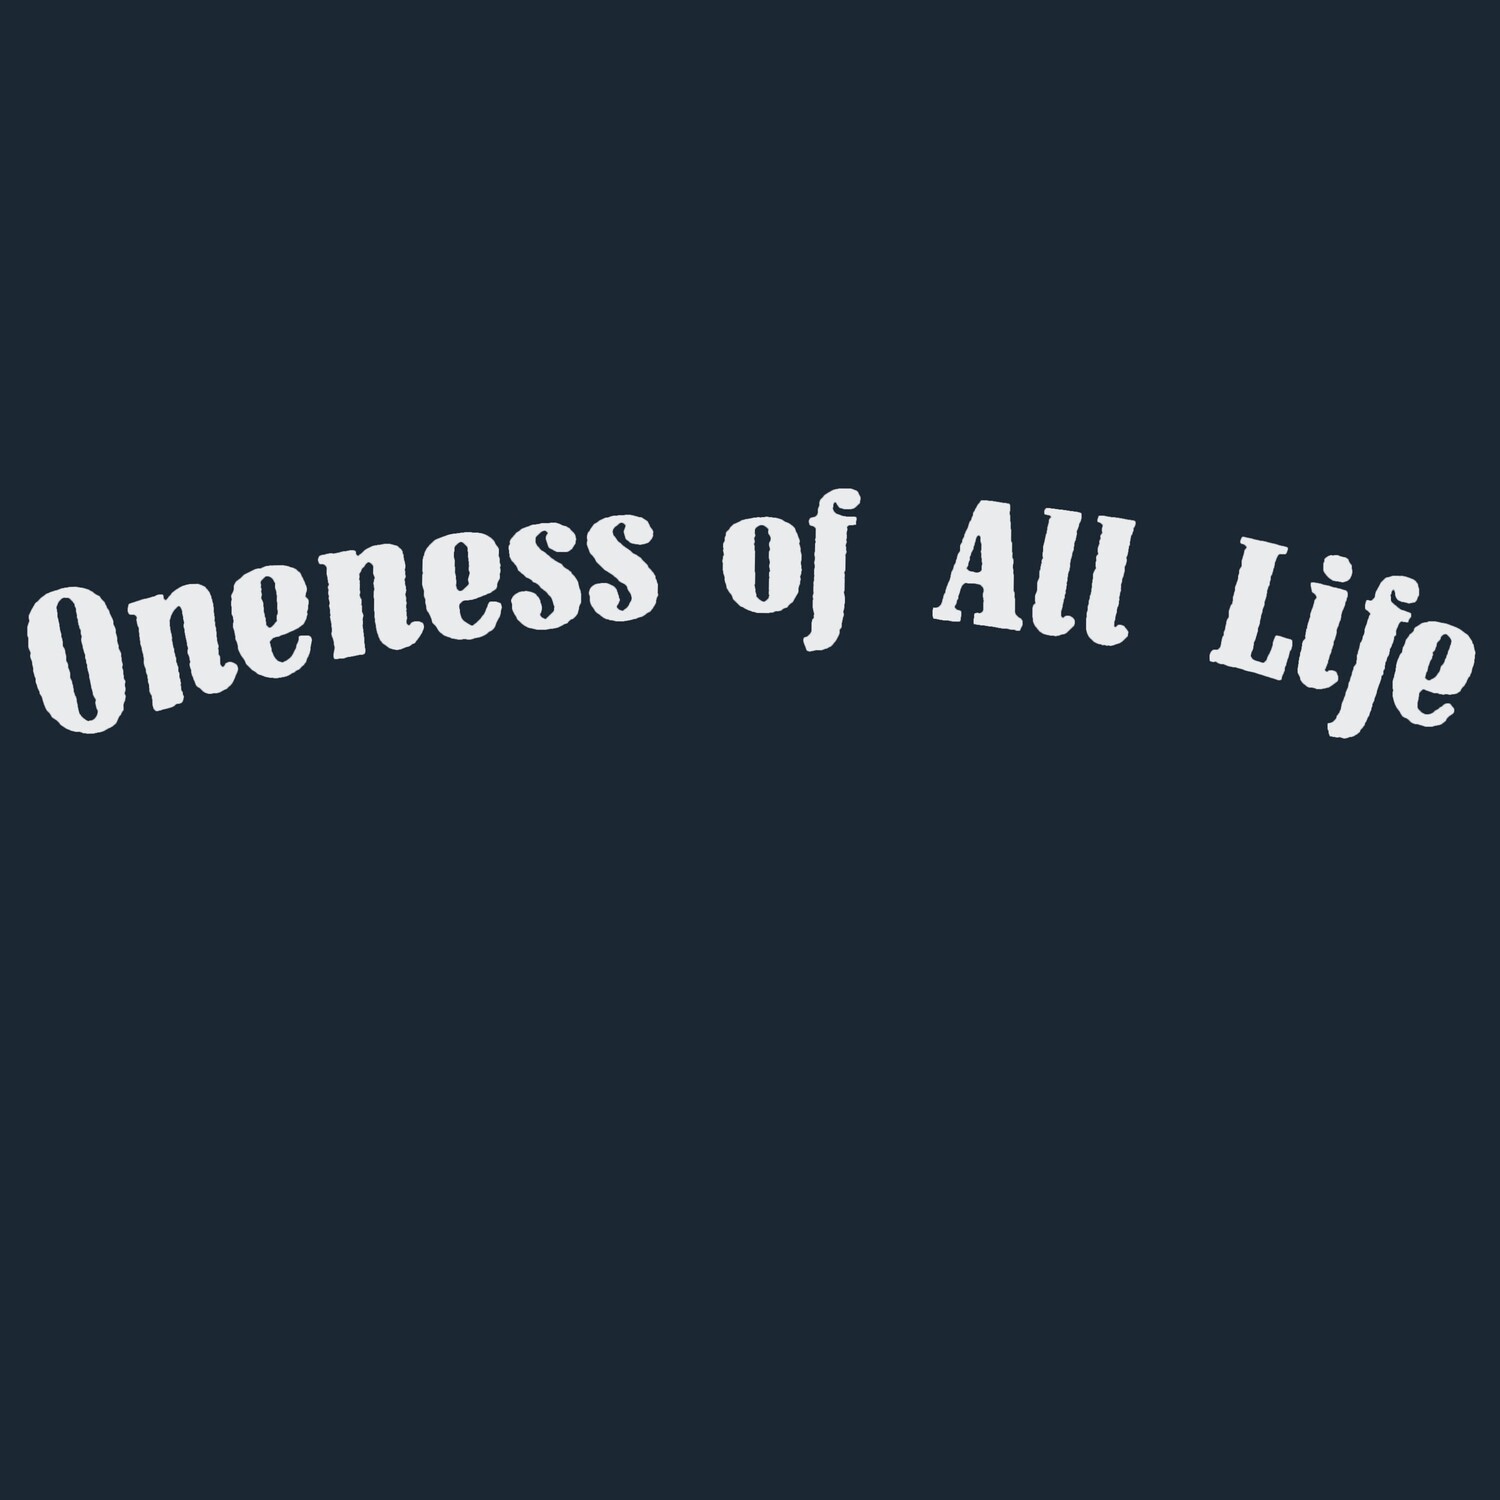 ONENESS OF ALL LIFE shirt